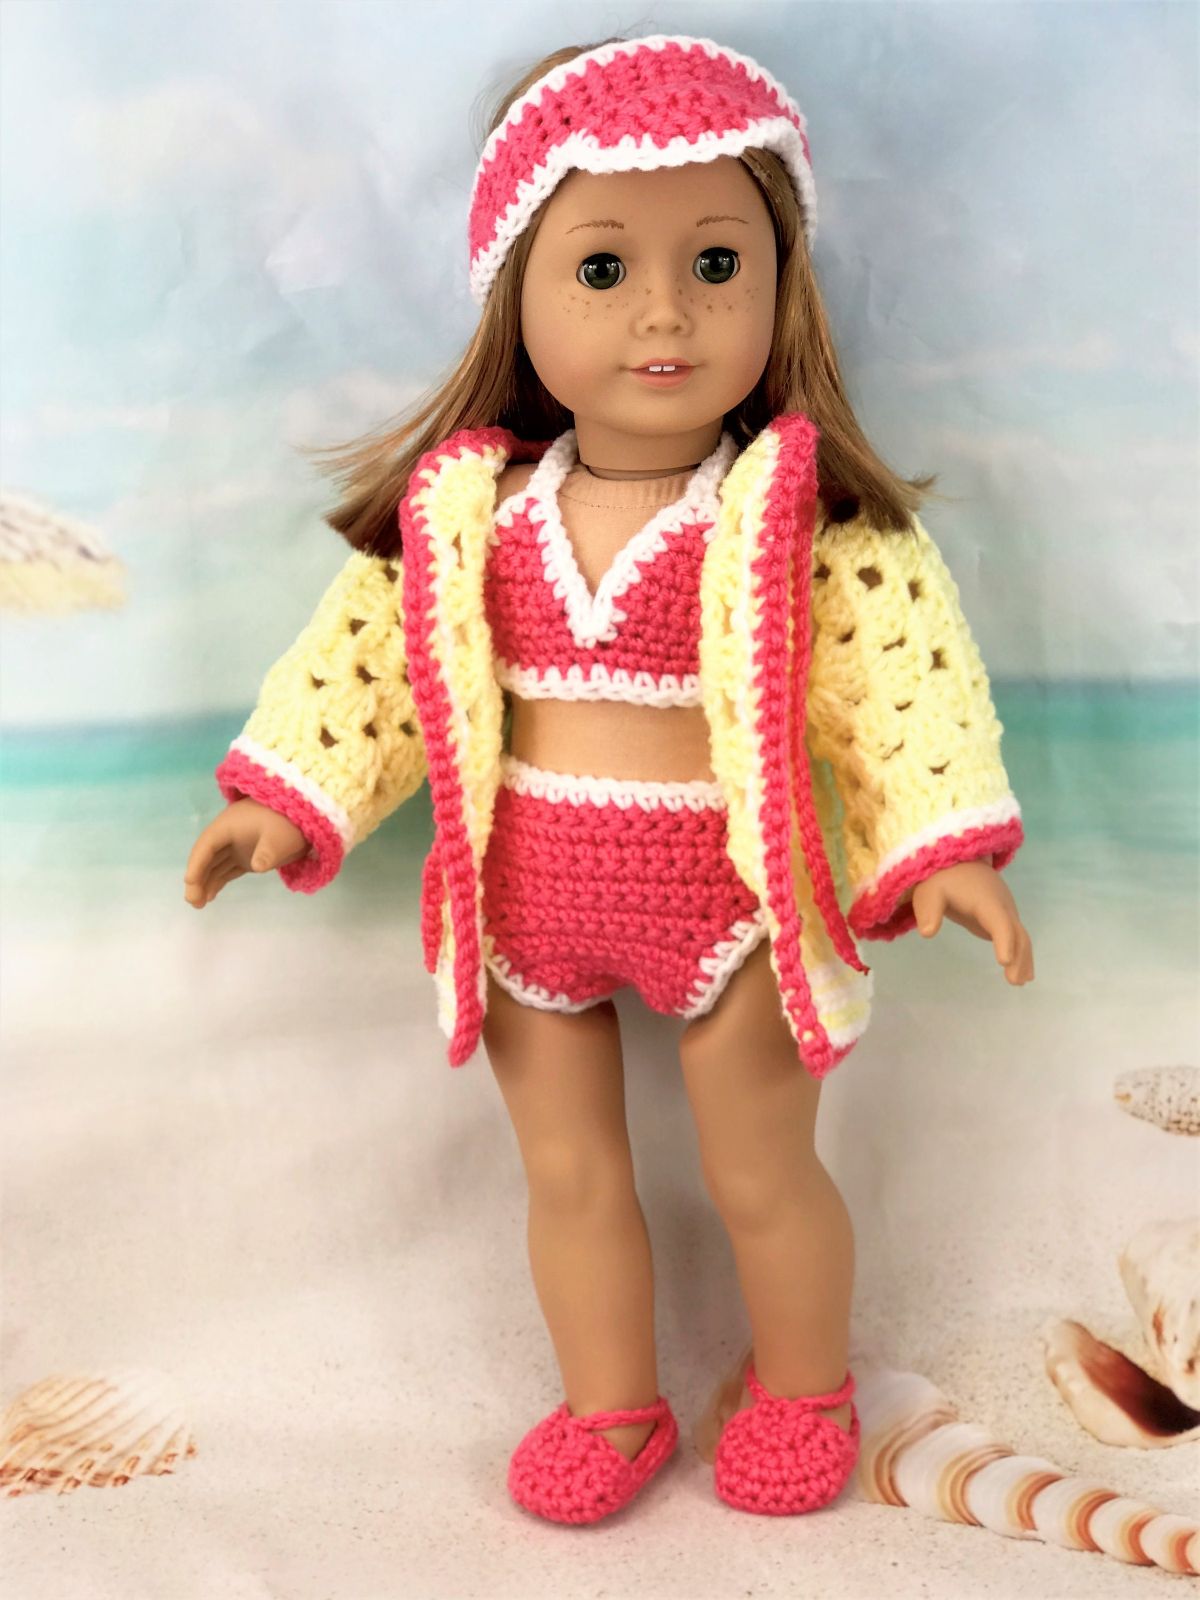 An American doll wearing a pink and white crochet headband, matching bikini set, and a yellow and pink cardigan with pink slip-on shoes.